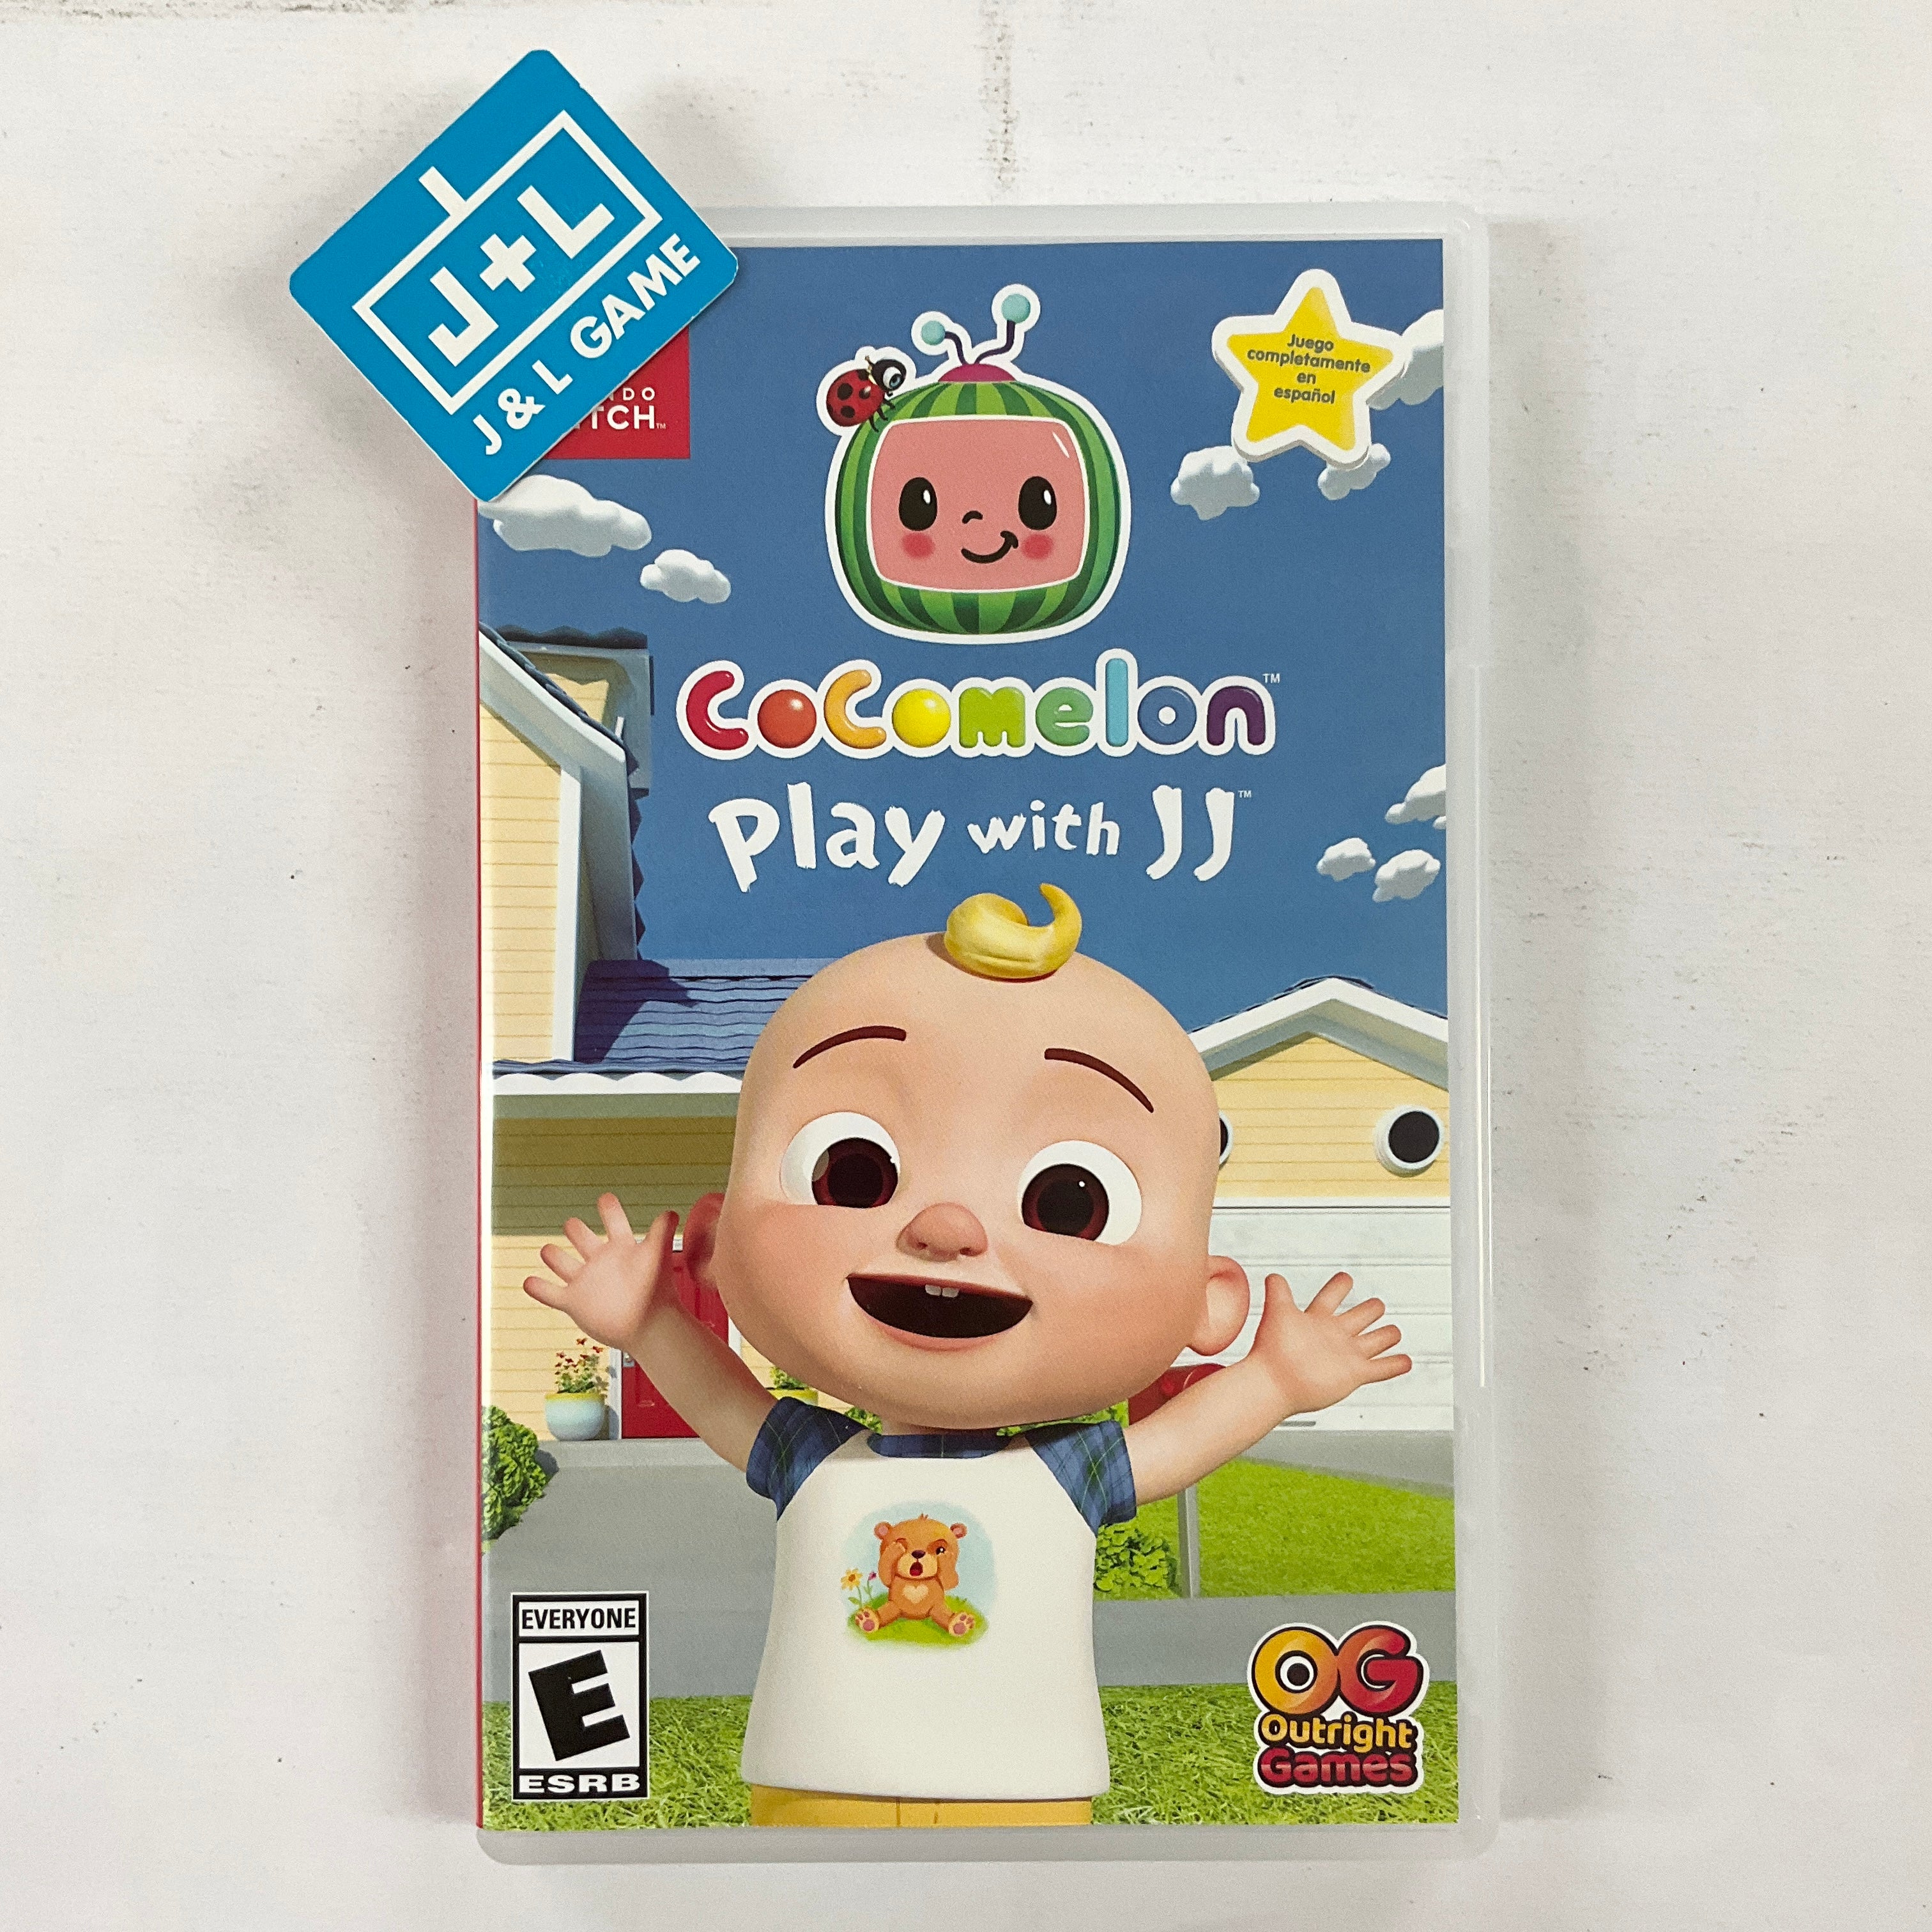 Coco Melon: Play with JJ - (NSW) Nintendo Switch [UNBOXING] Video Games Outright Games   